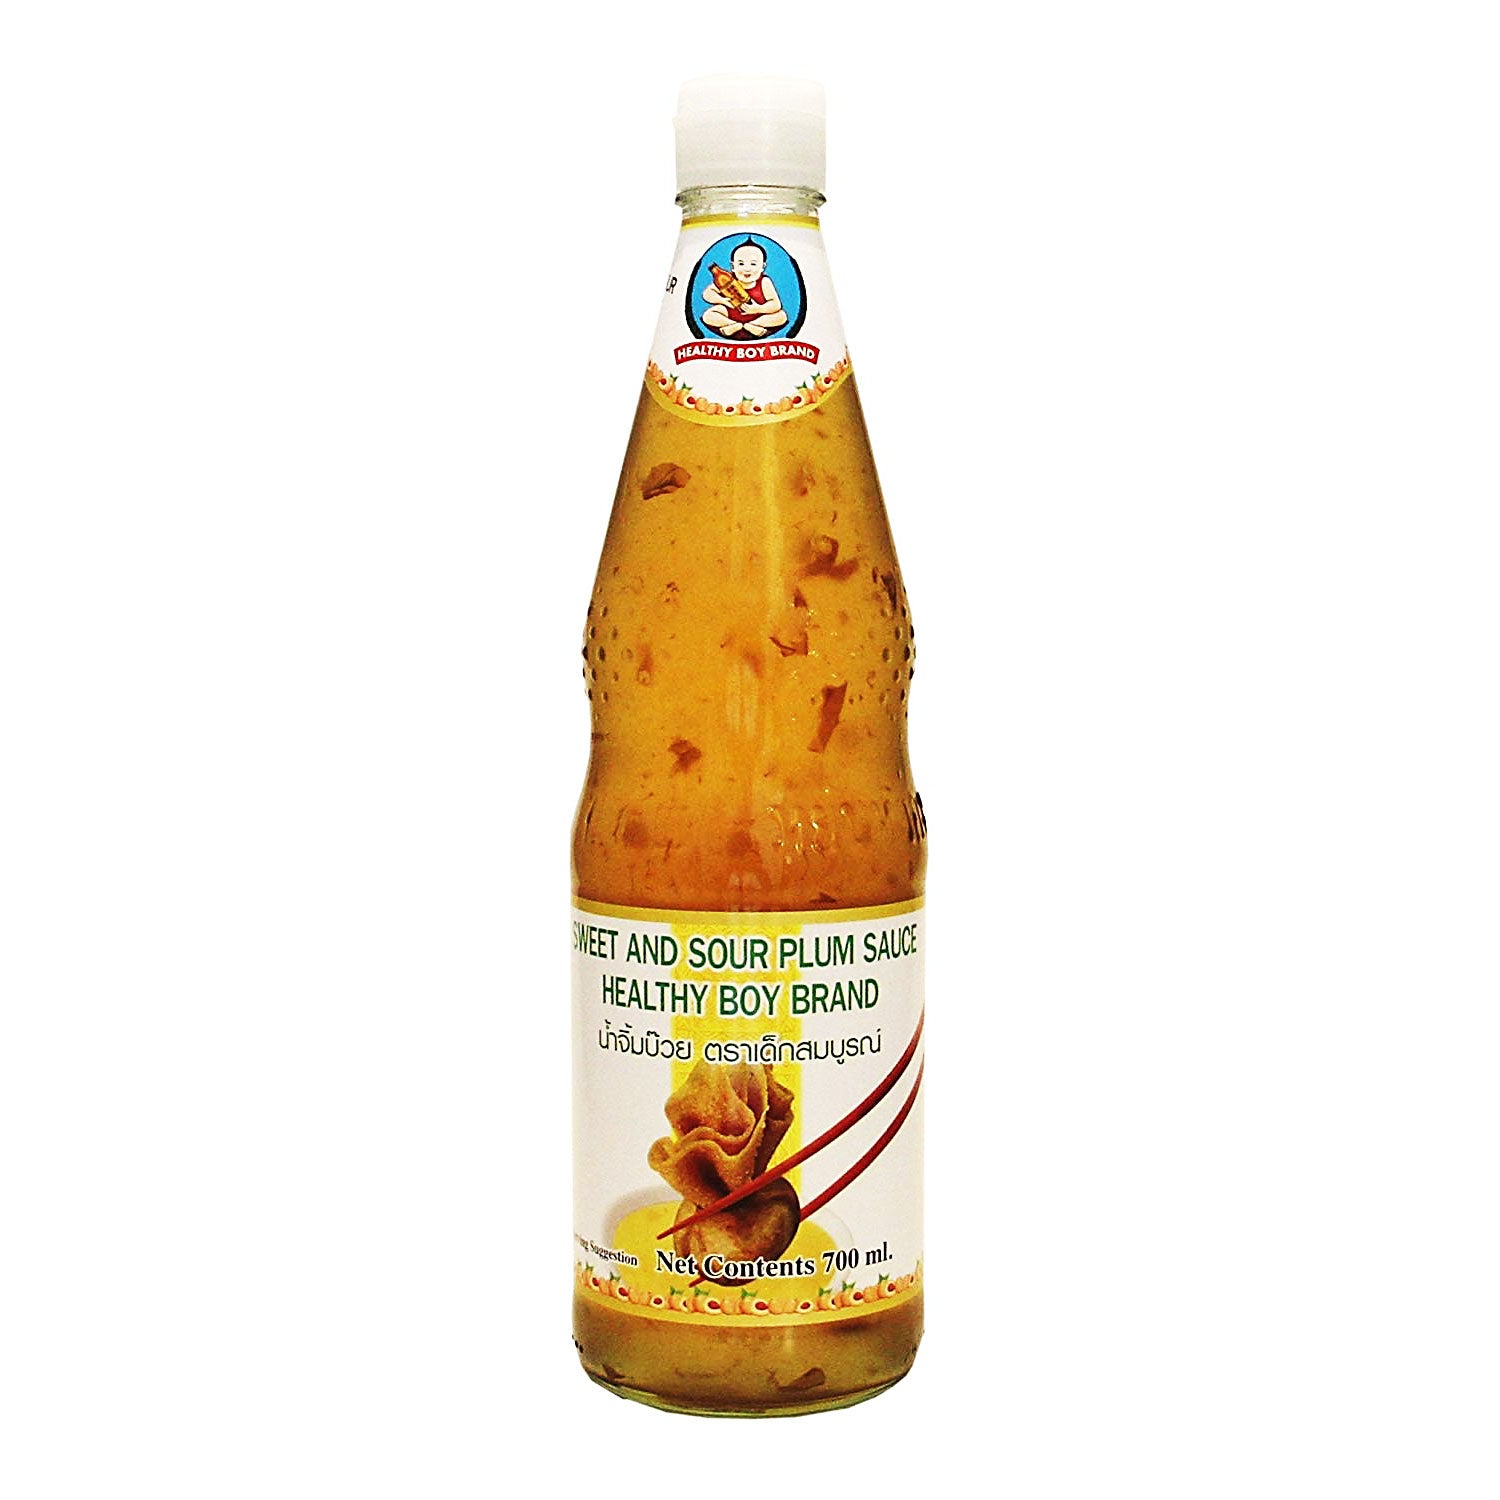 Thai Sweet and Sour Plum Sauce 700ml bottle by Healthy Boy